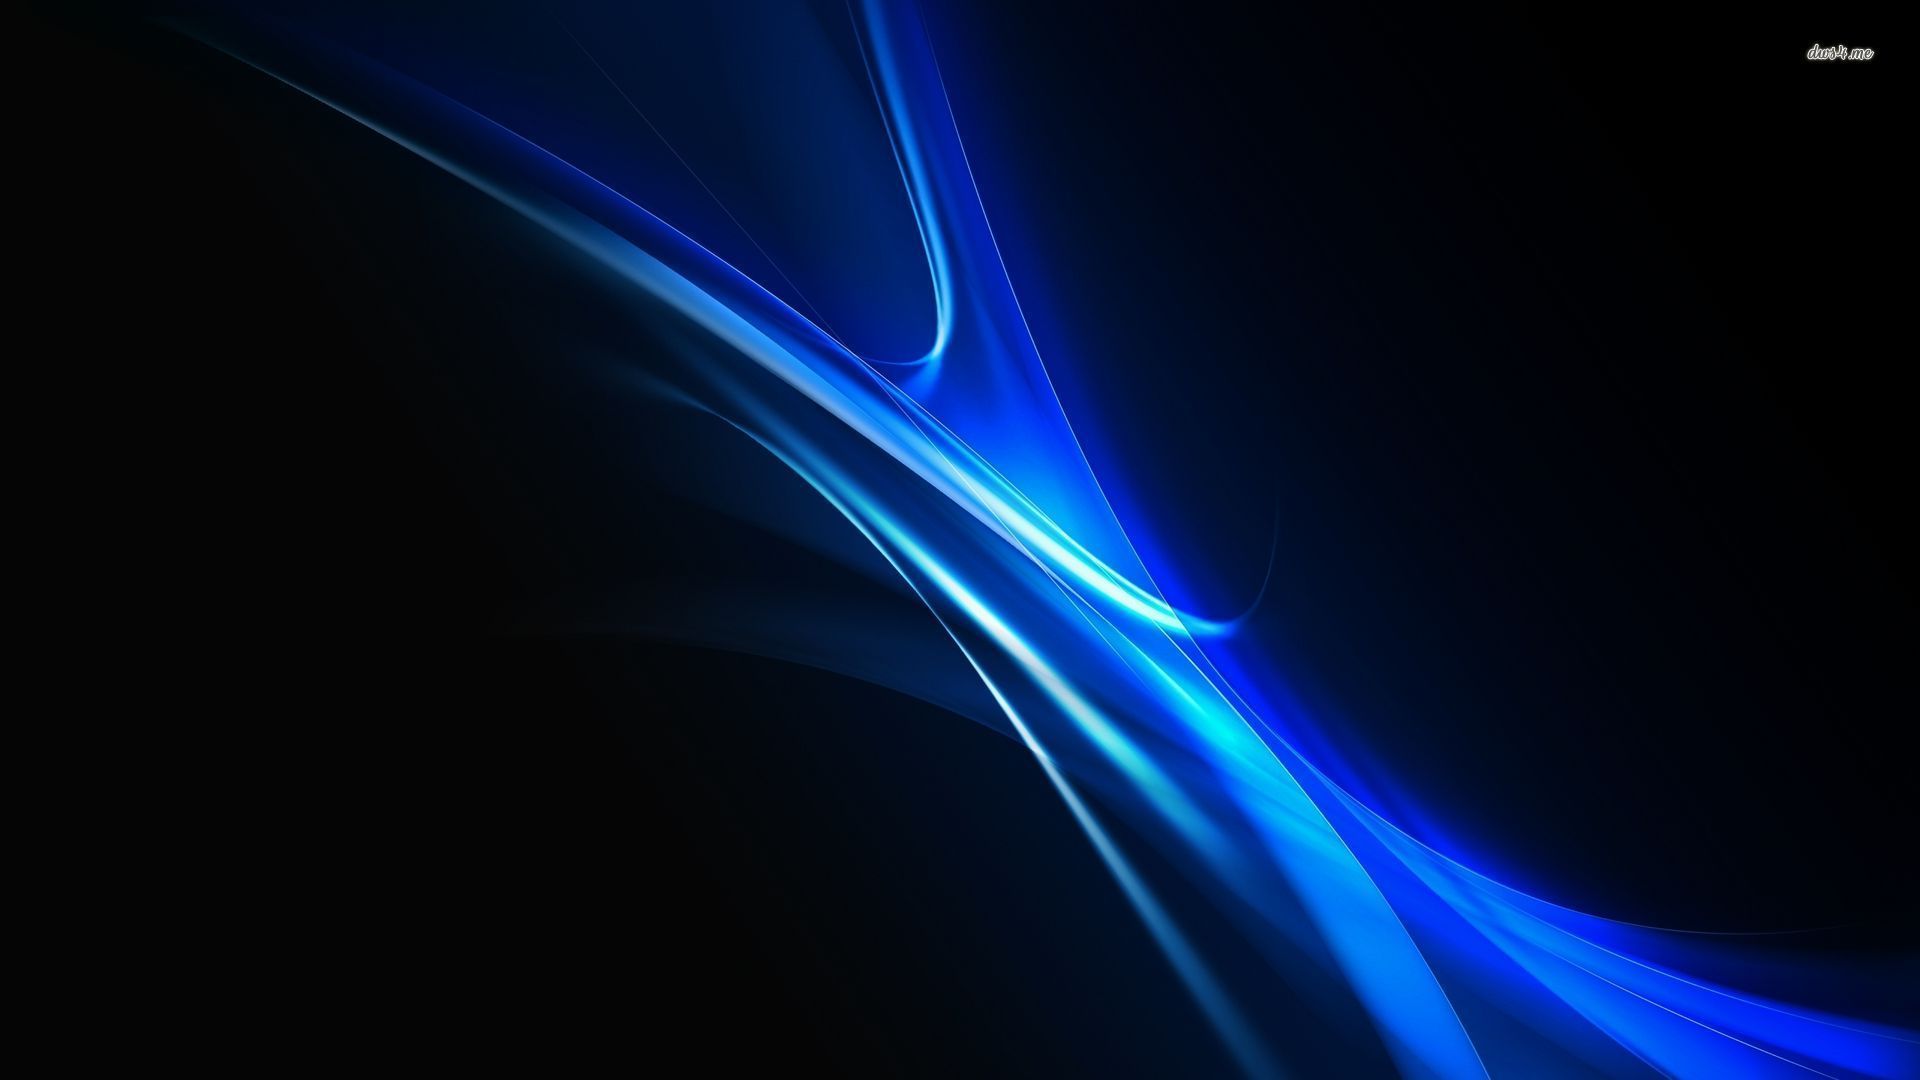 Blue Fluorescent Lines wallpaper - Abstract wallpapers - #5125